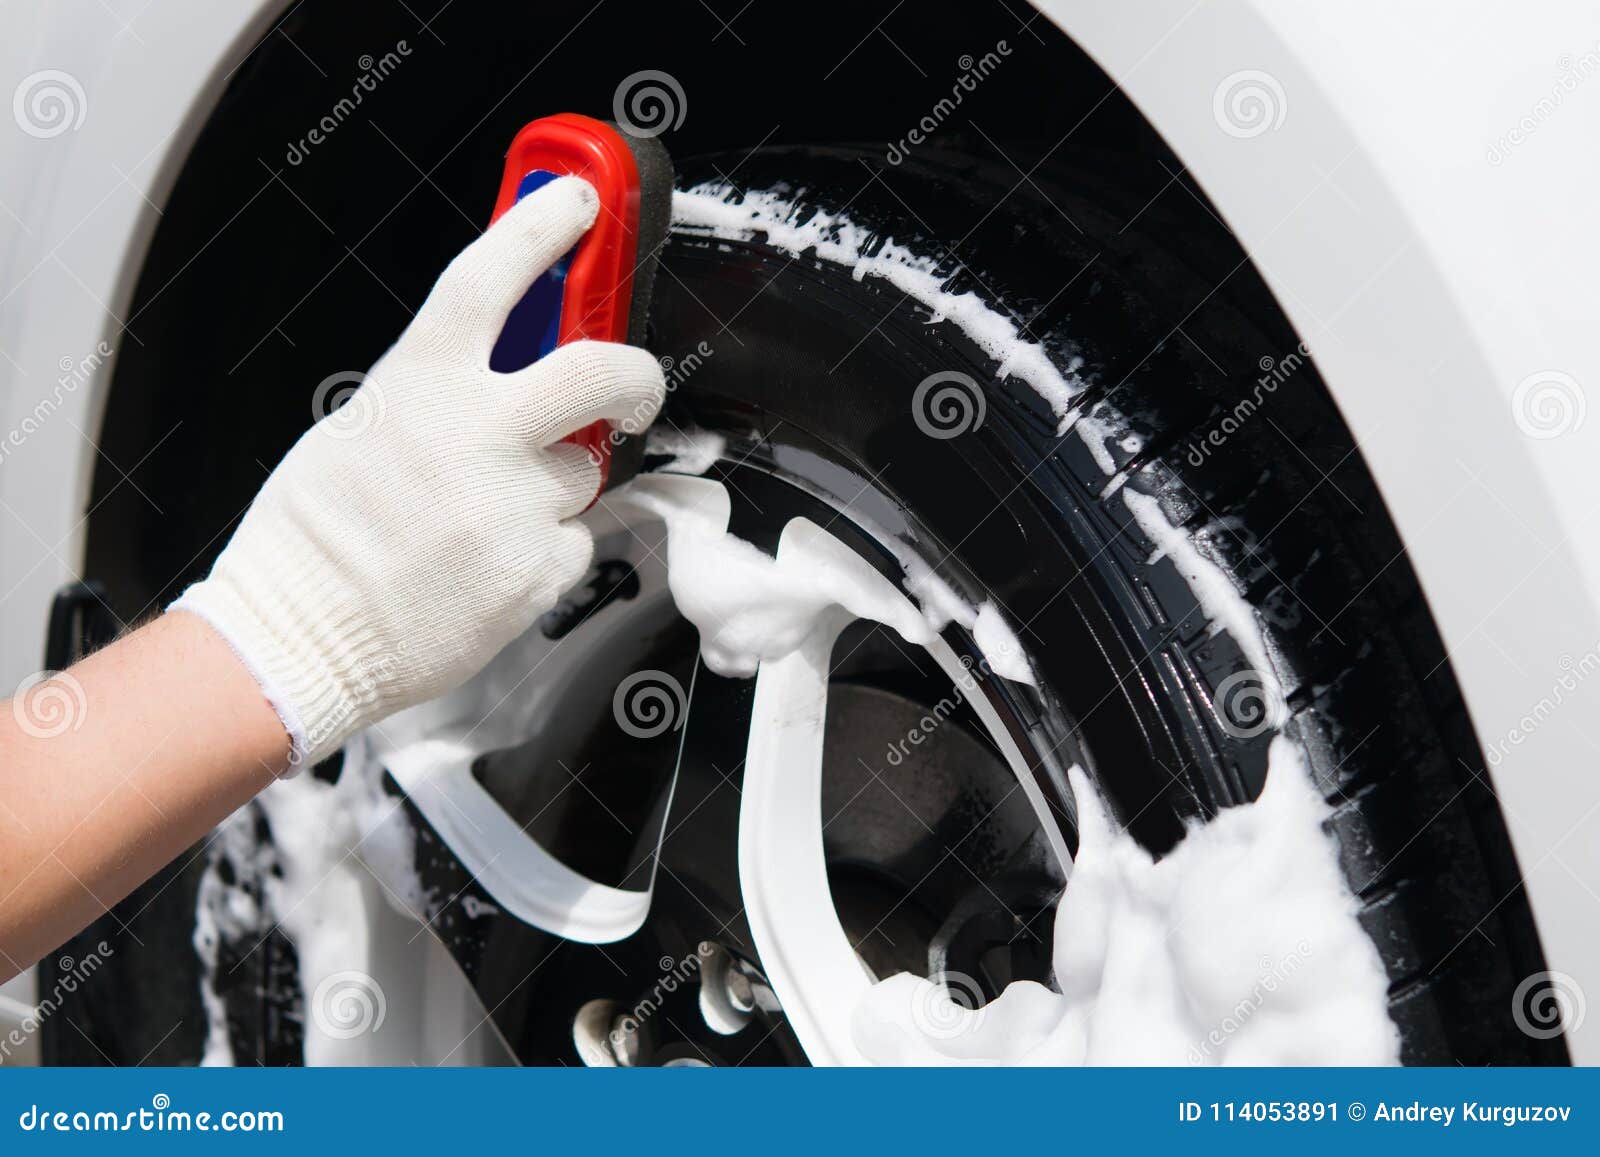 car tire protective treatment for prolongation of service life